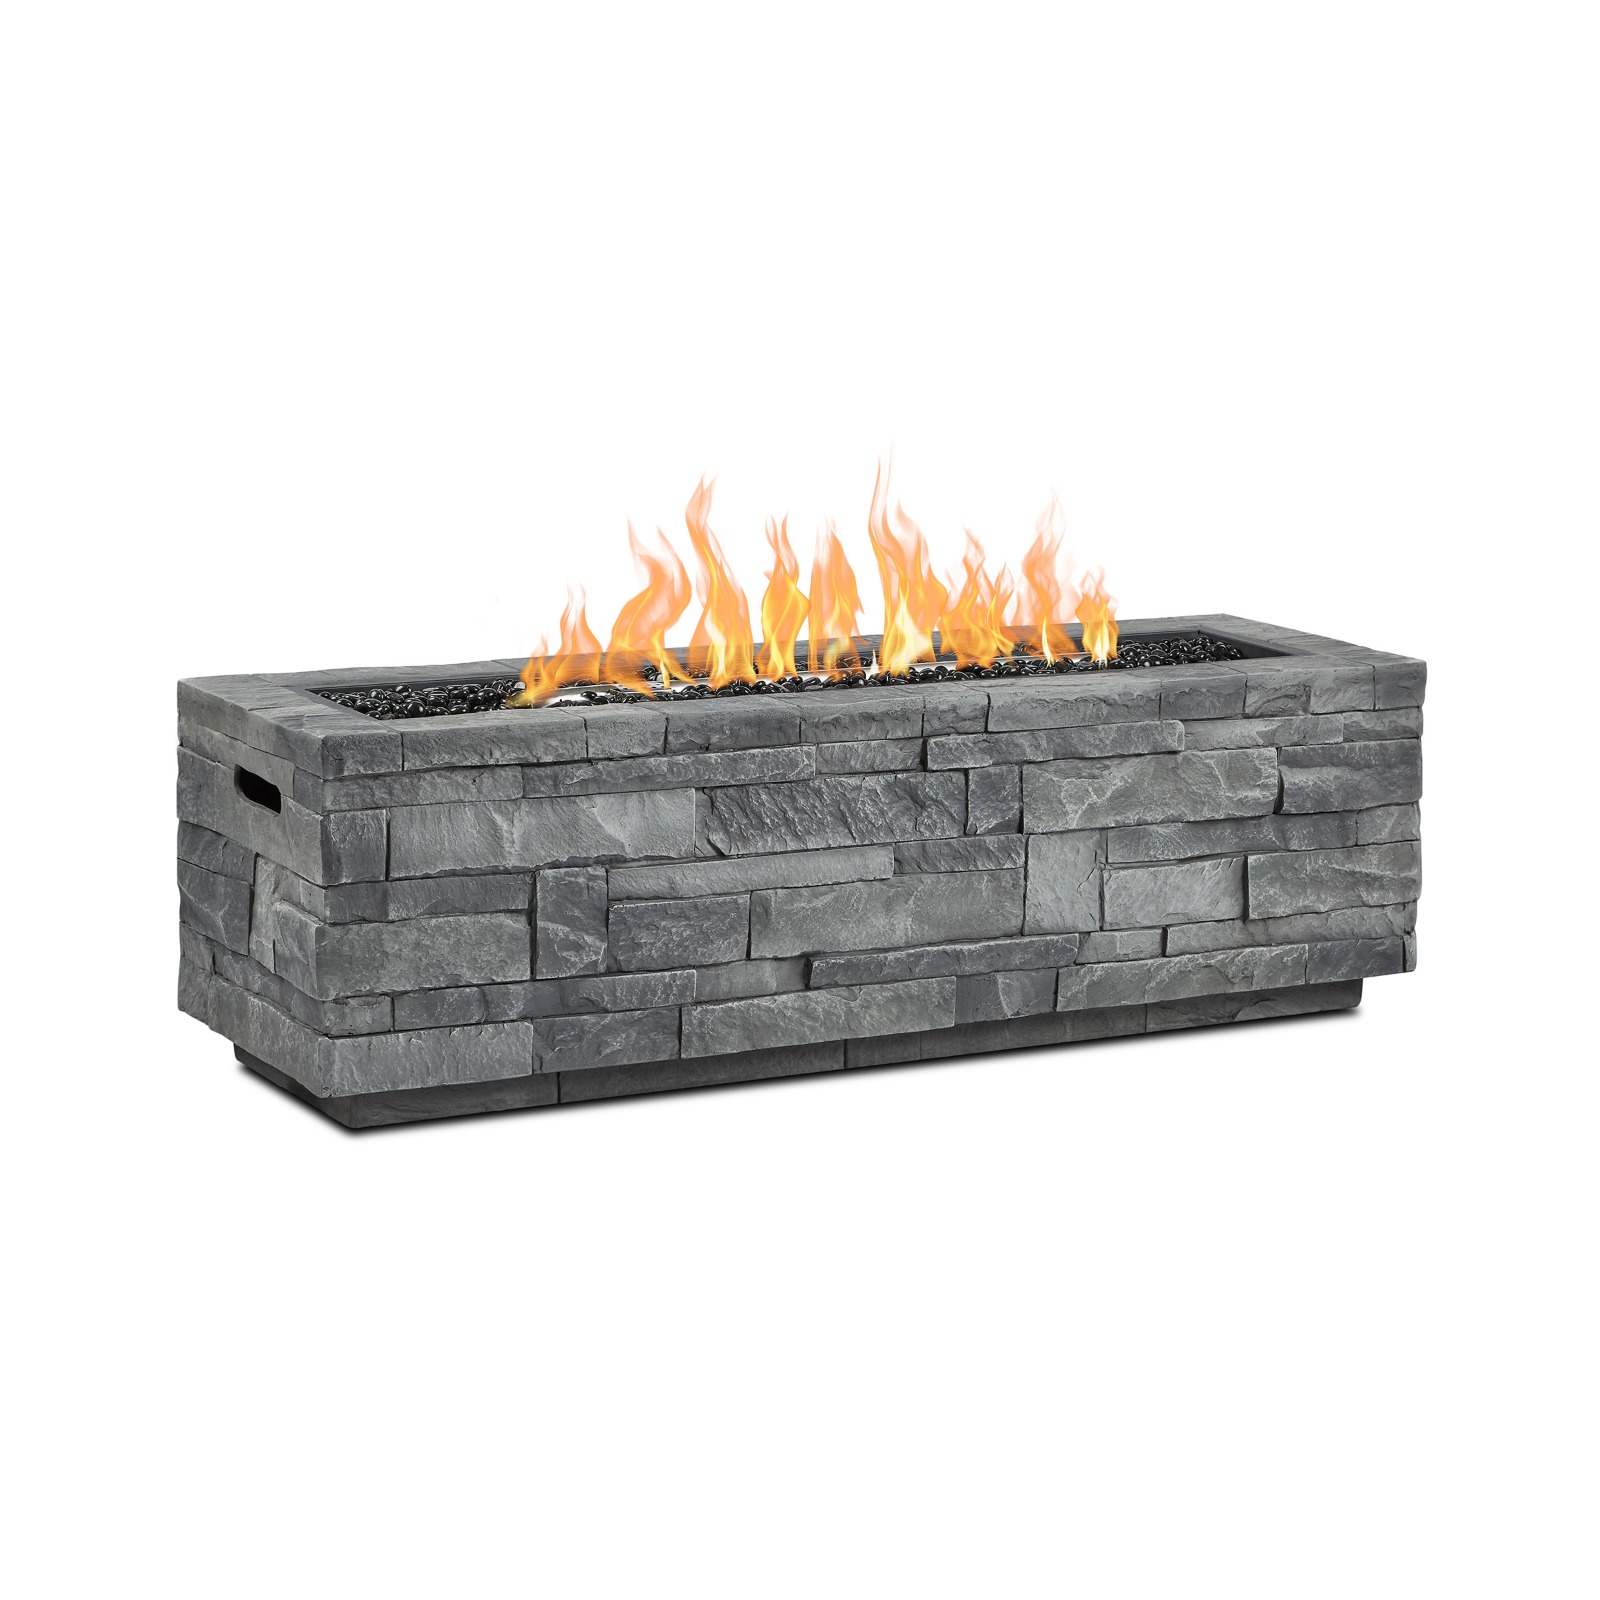 Ledgestone Rectangle Propane Fire Pit Outdoor Fireplace Fire Table for Backyard or Patio